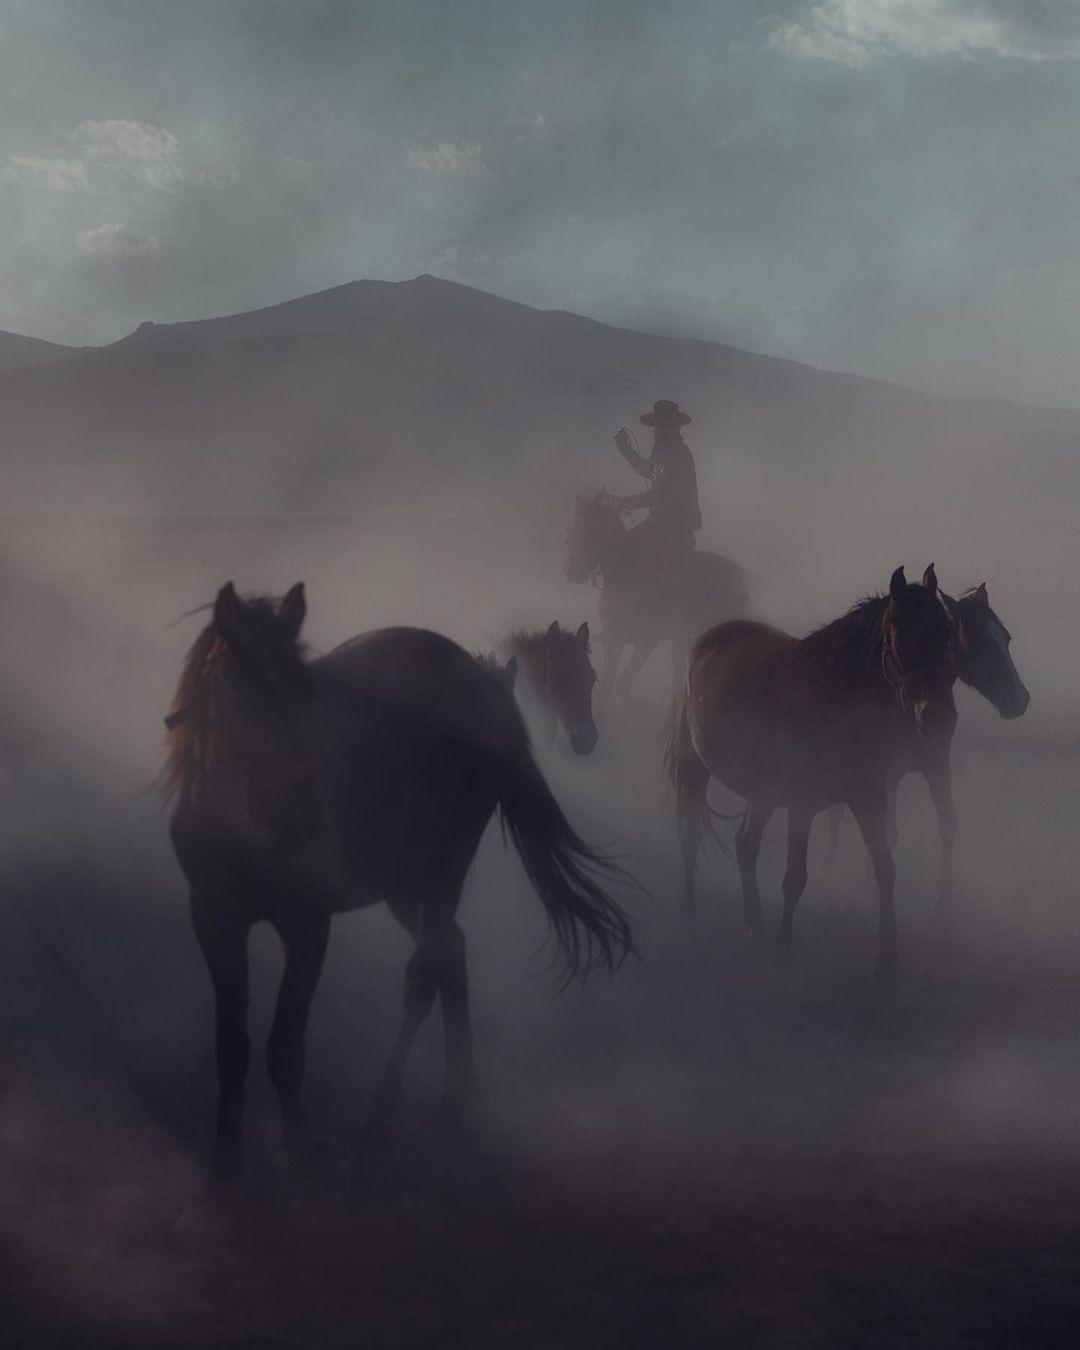 class="content__text"
 You don’t really see wild horses everyday, and it’s the thrill of a lifetime, but mostly all you ever see is a cloud of dust, and after, they are gone 💨 
 